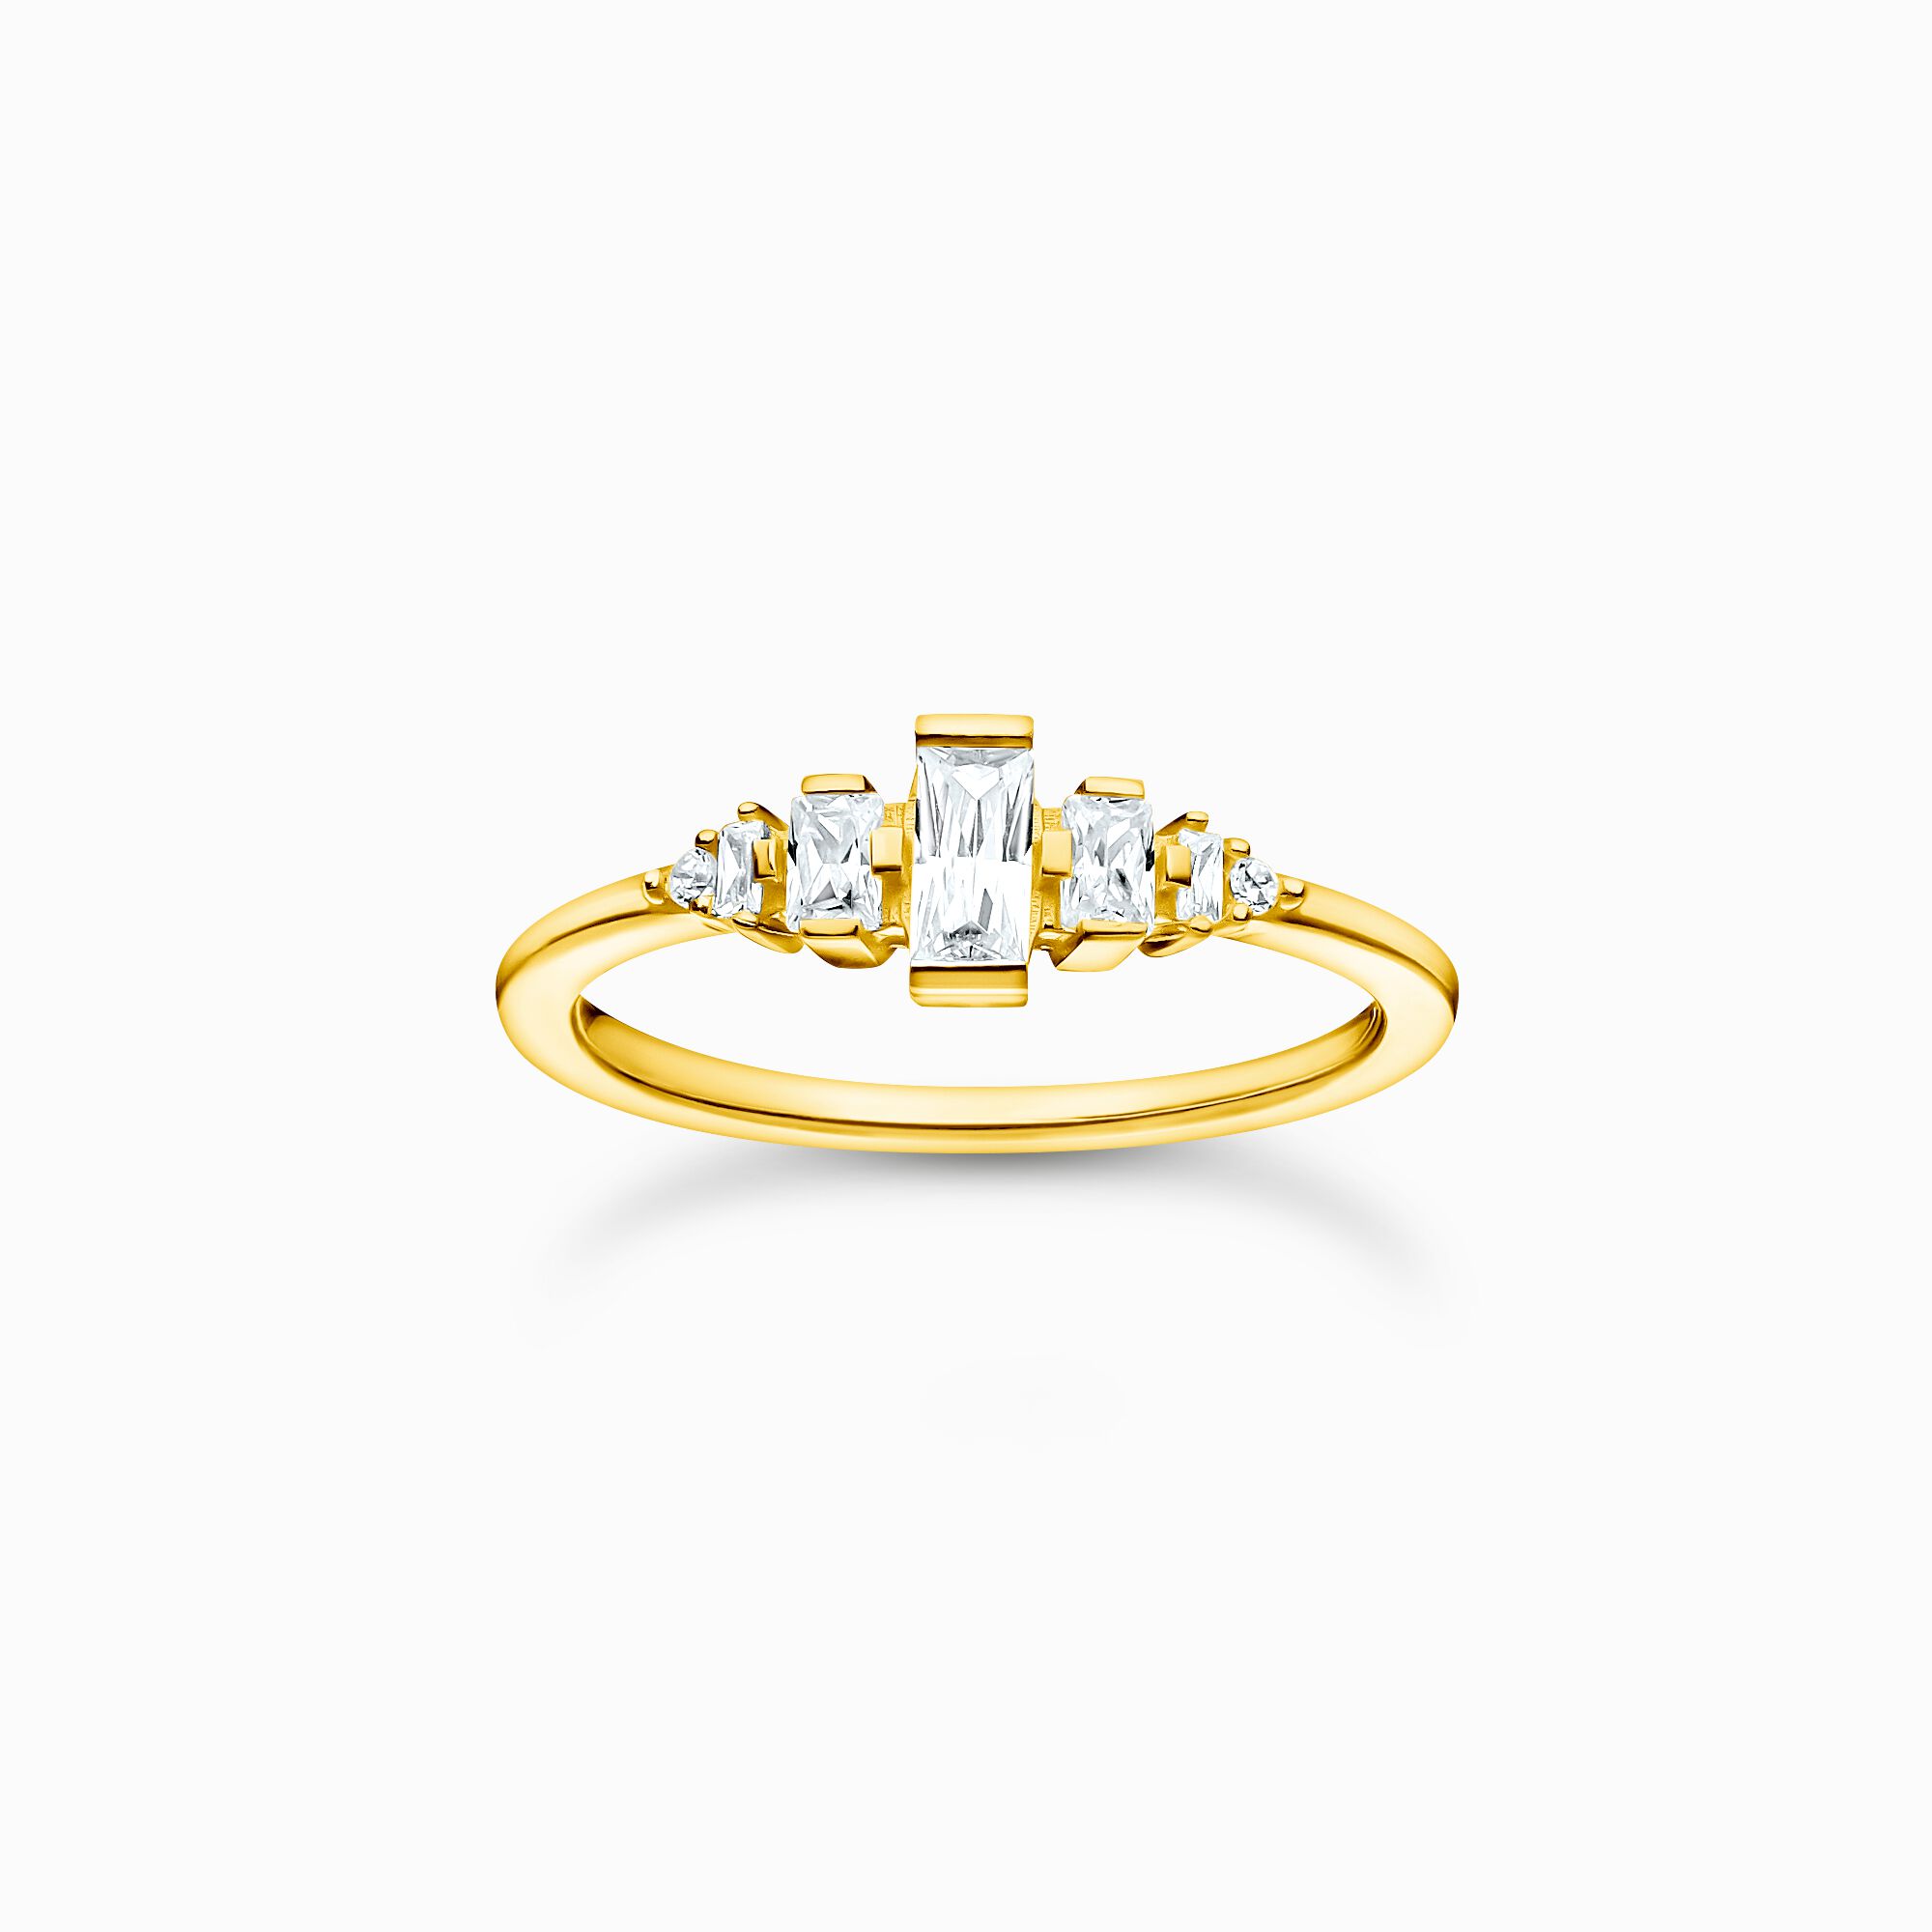 Ring vintage white stones gold from the Charming Collection collection in the THOMAS SABO online store